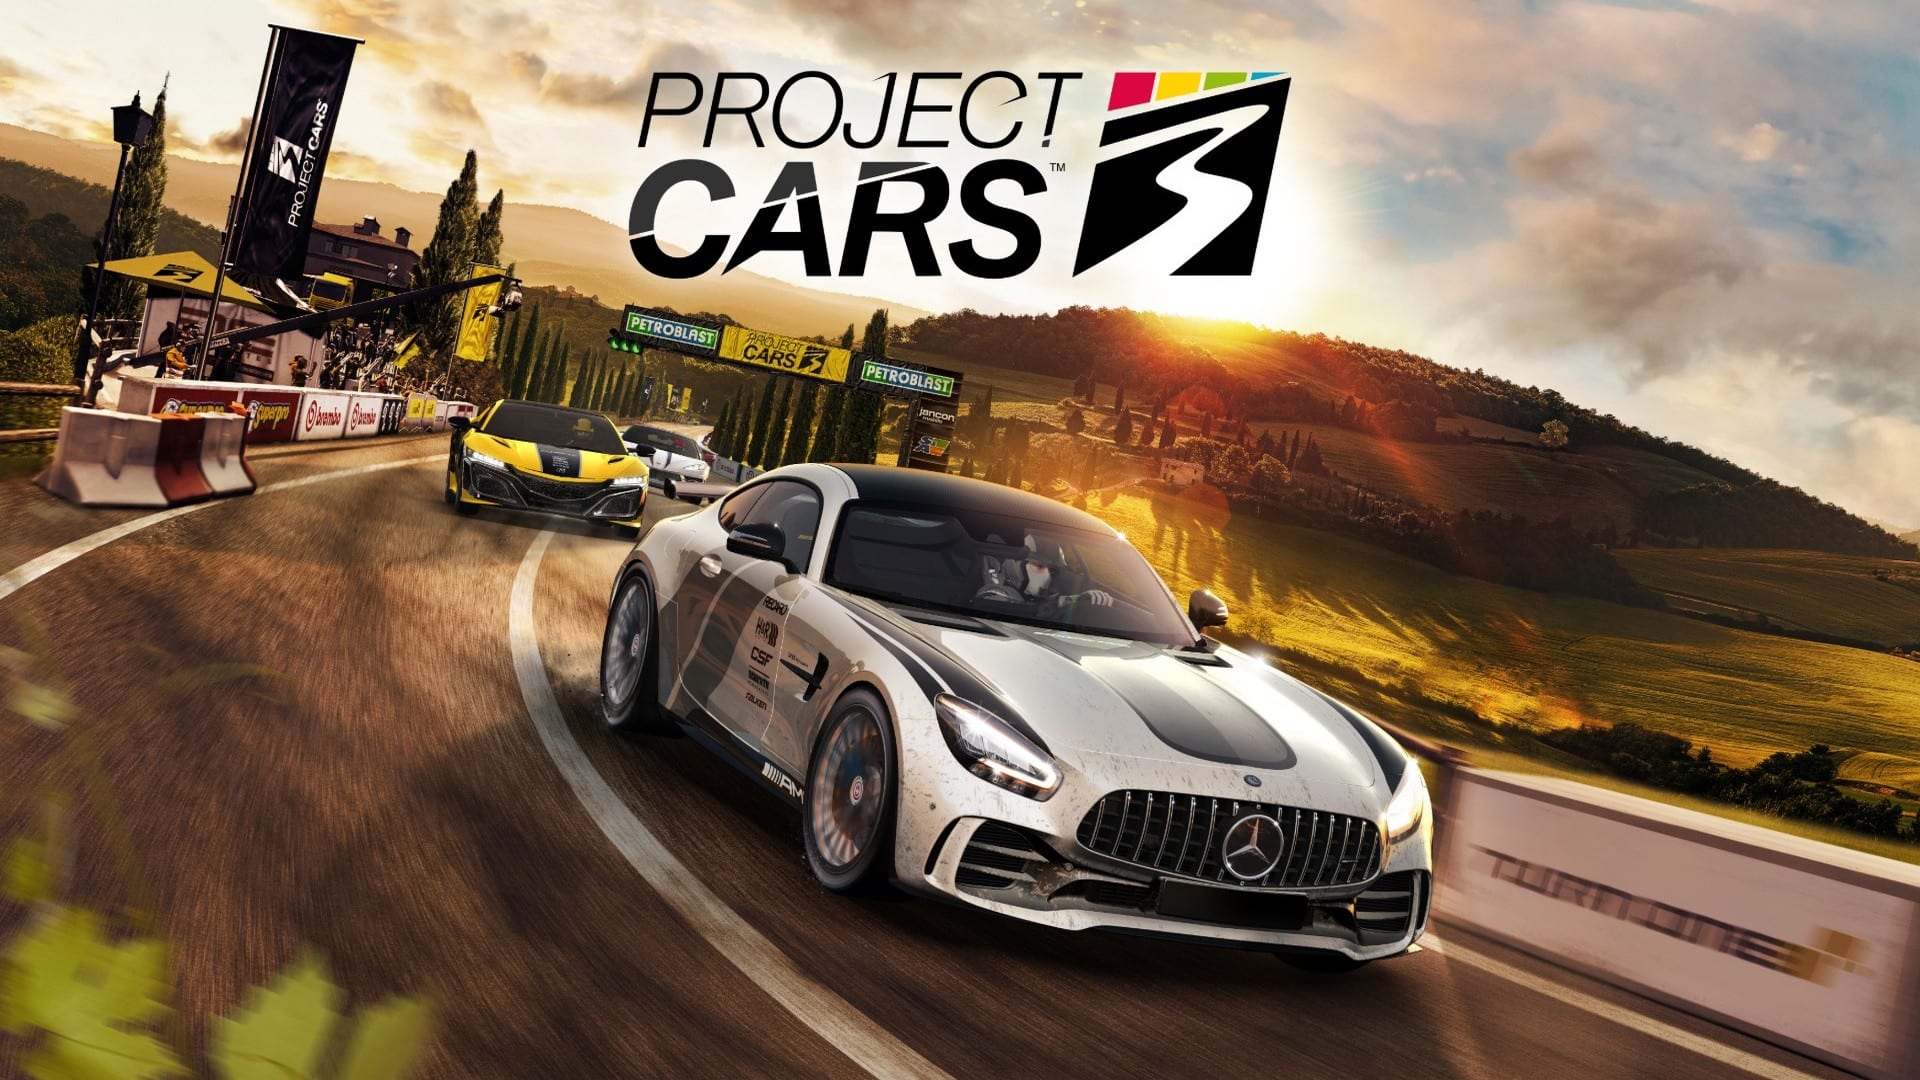 Project Cars 3 Releases The “Legends Pack” Add-on, The First of 4 DLC Packs